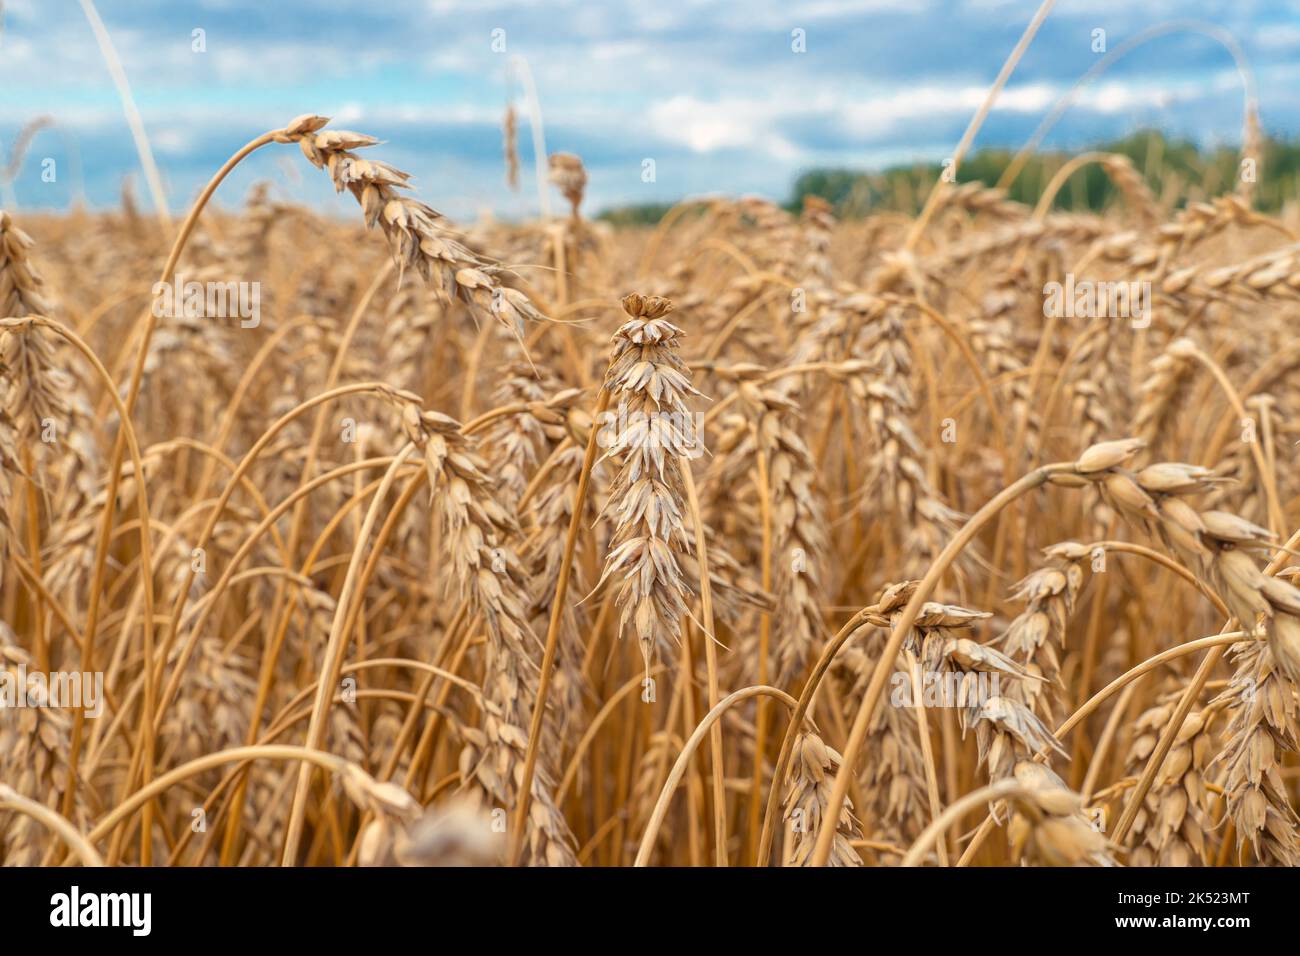 Golden Cereal field with ears of wheat,Agriculture farm and farming concept.Harvest.Wheat field.Rural Scenery.Ripening ears.Rancho harvest Concept.Rip Stock Photo